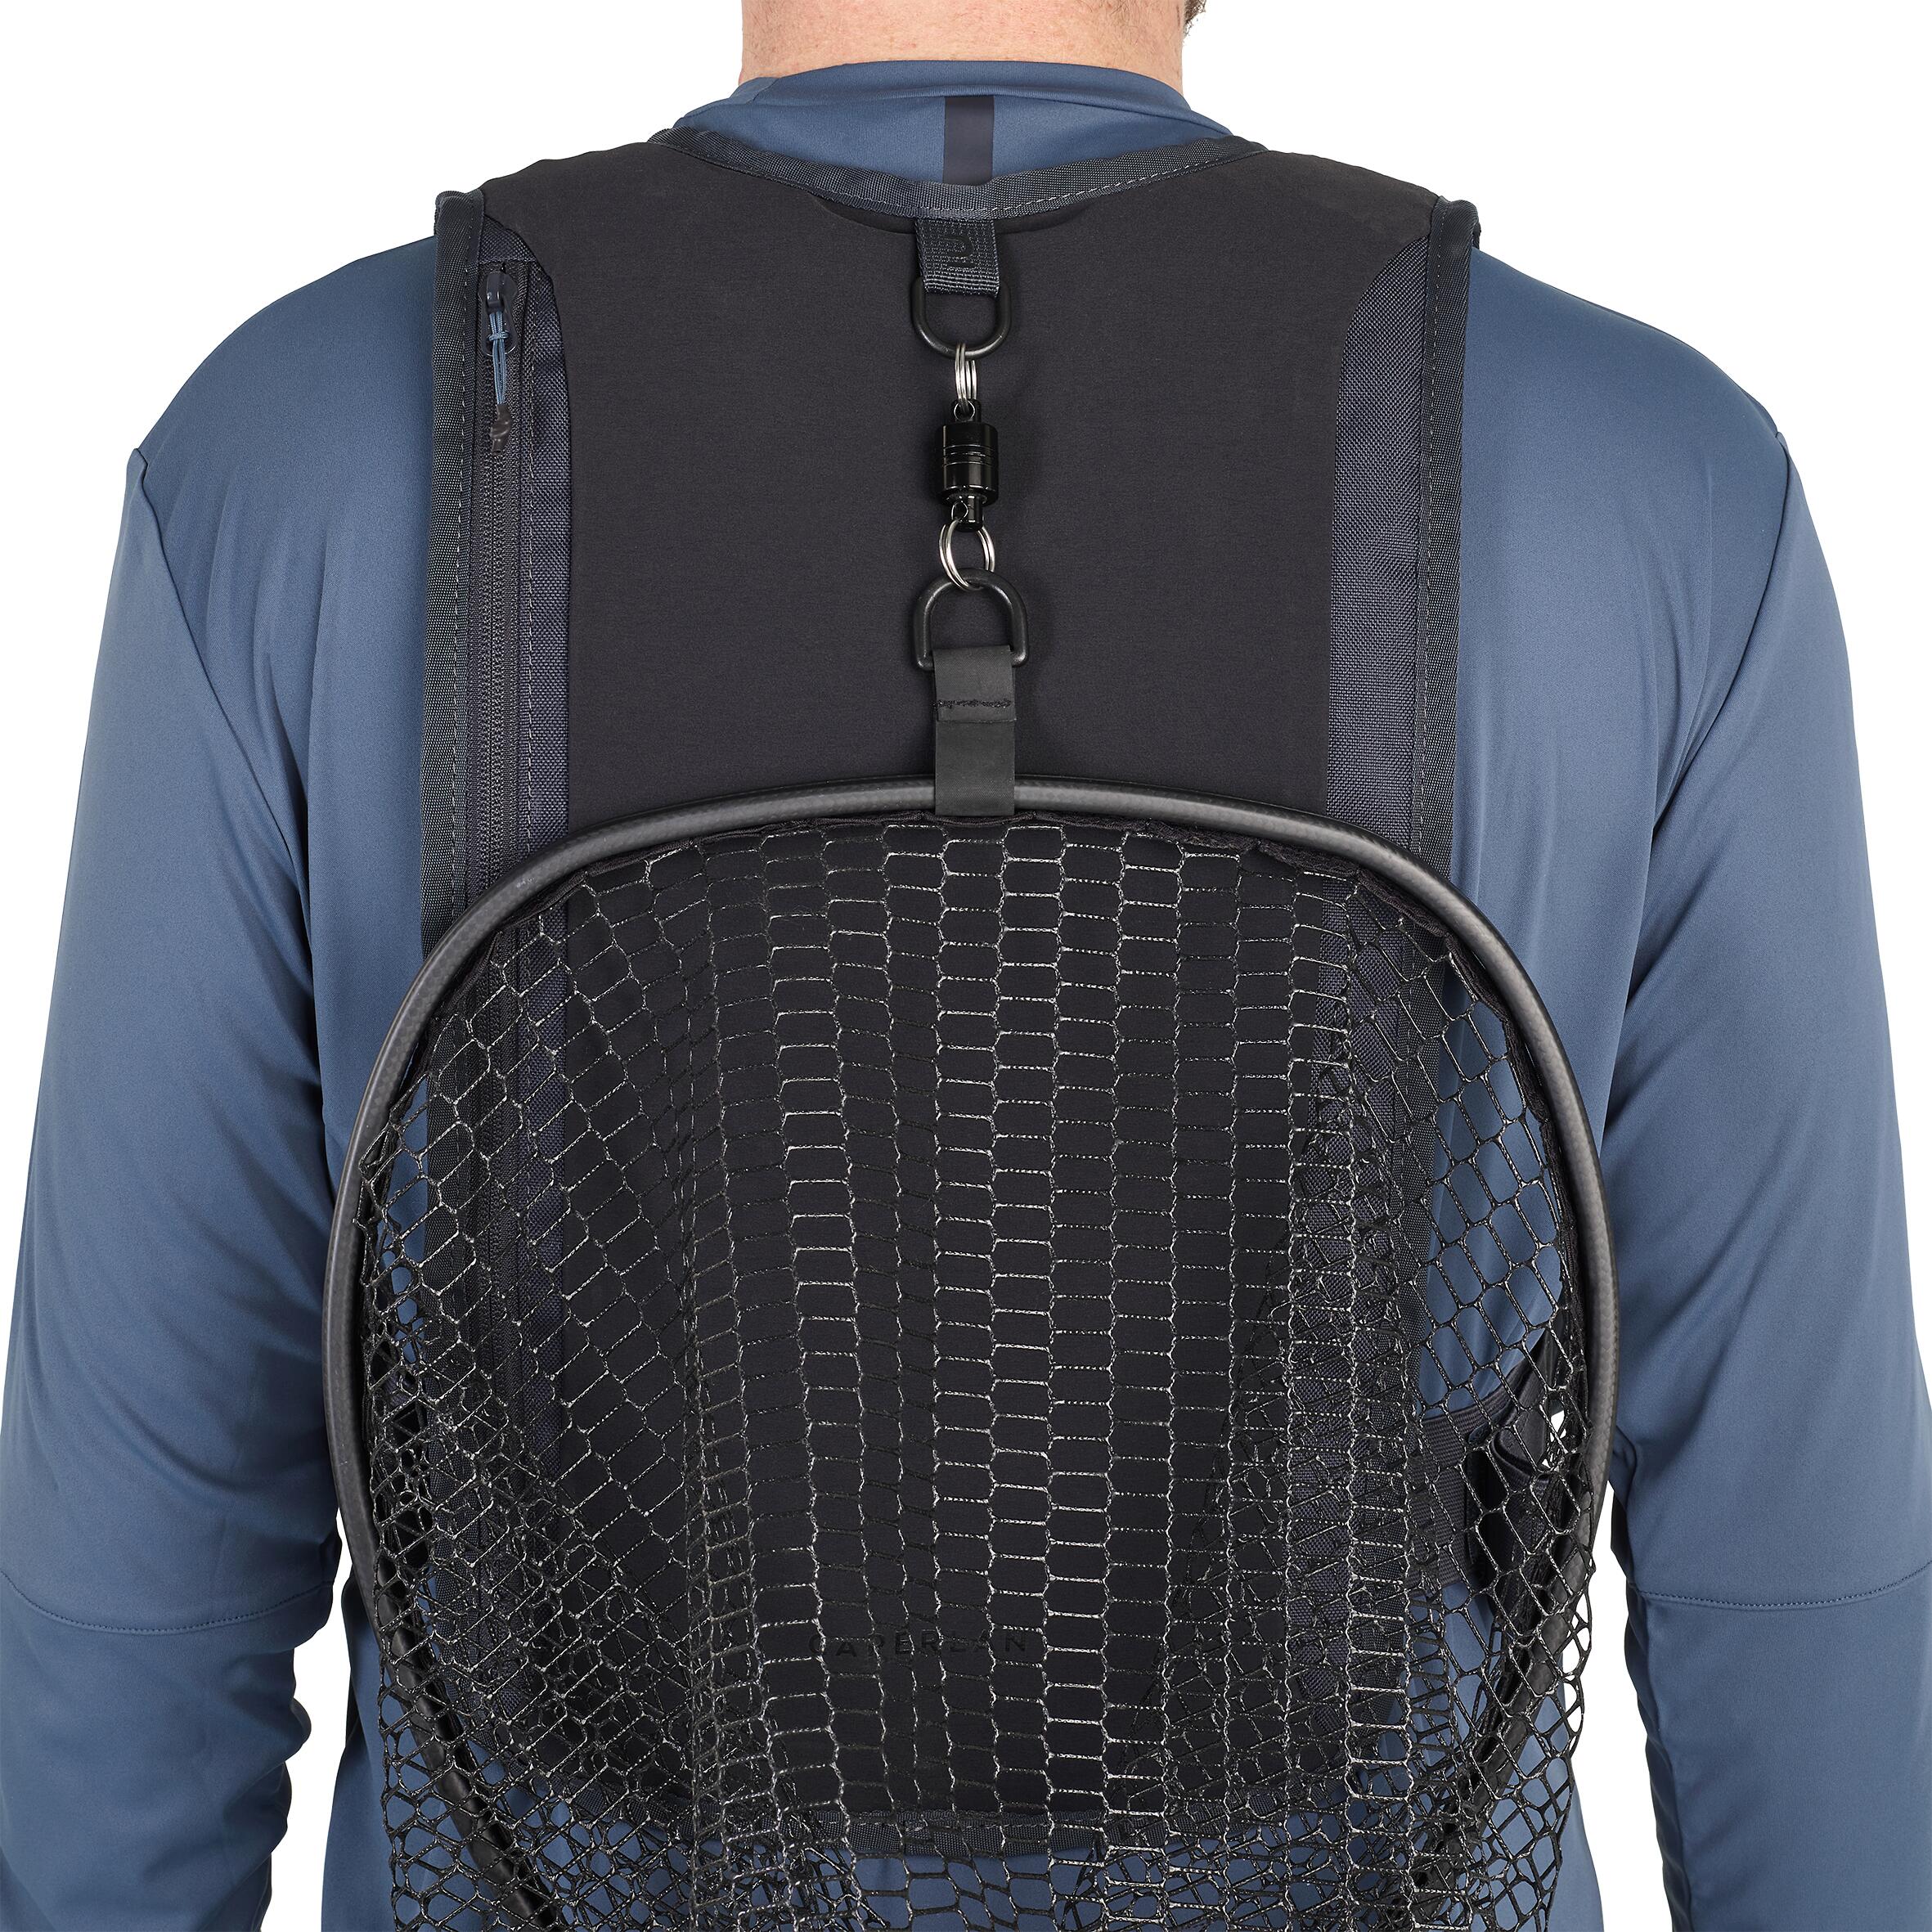 Dual Fishing Chest Pack 500 10 L 19/20